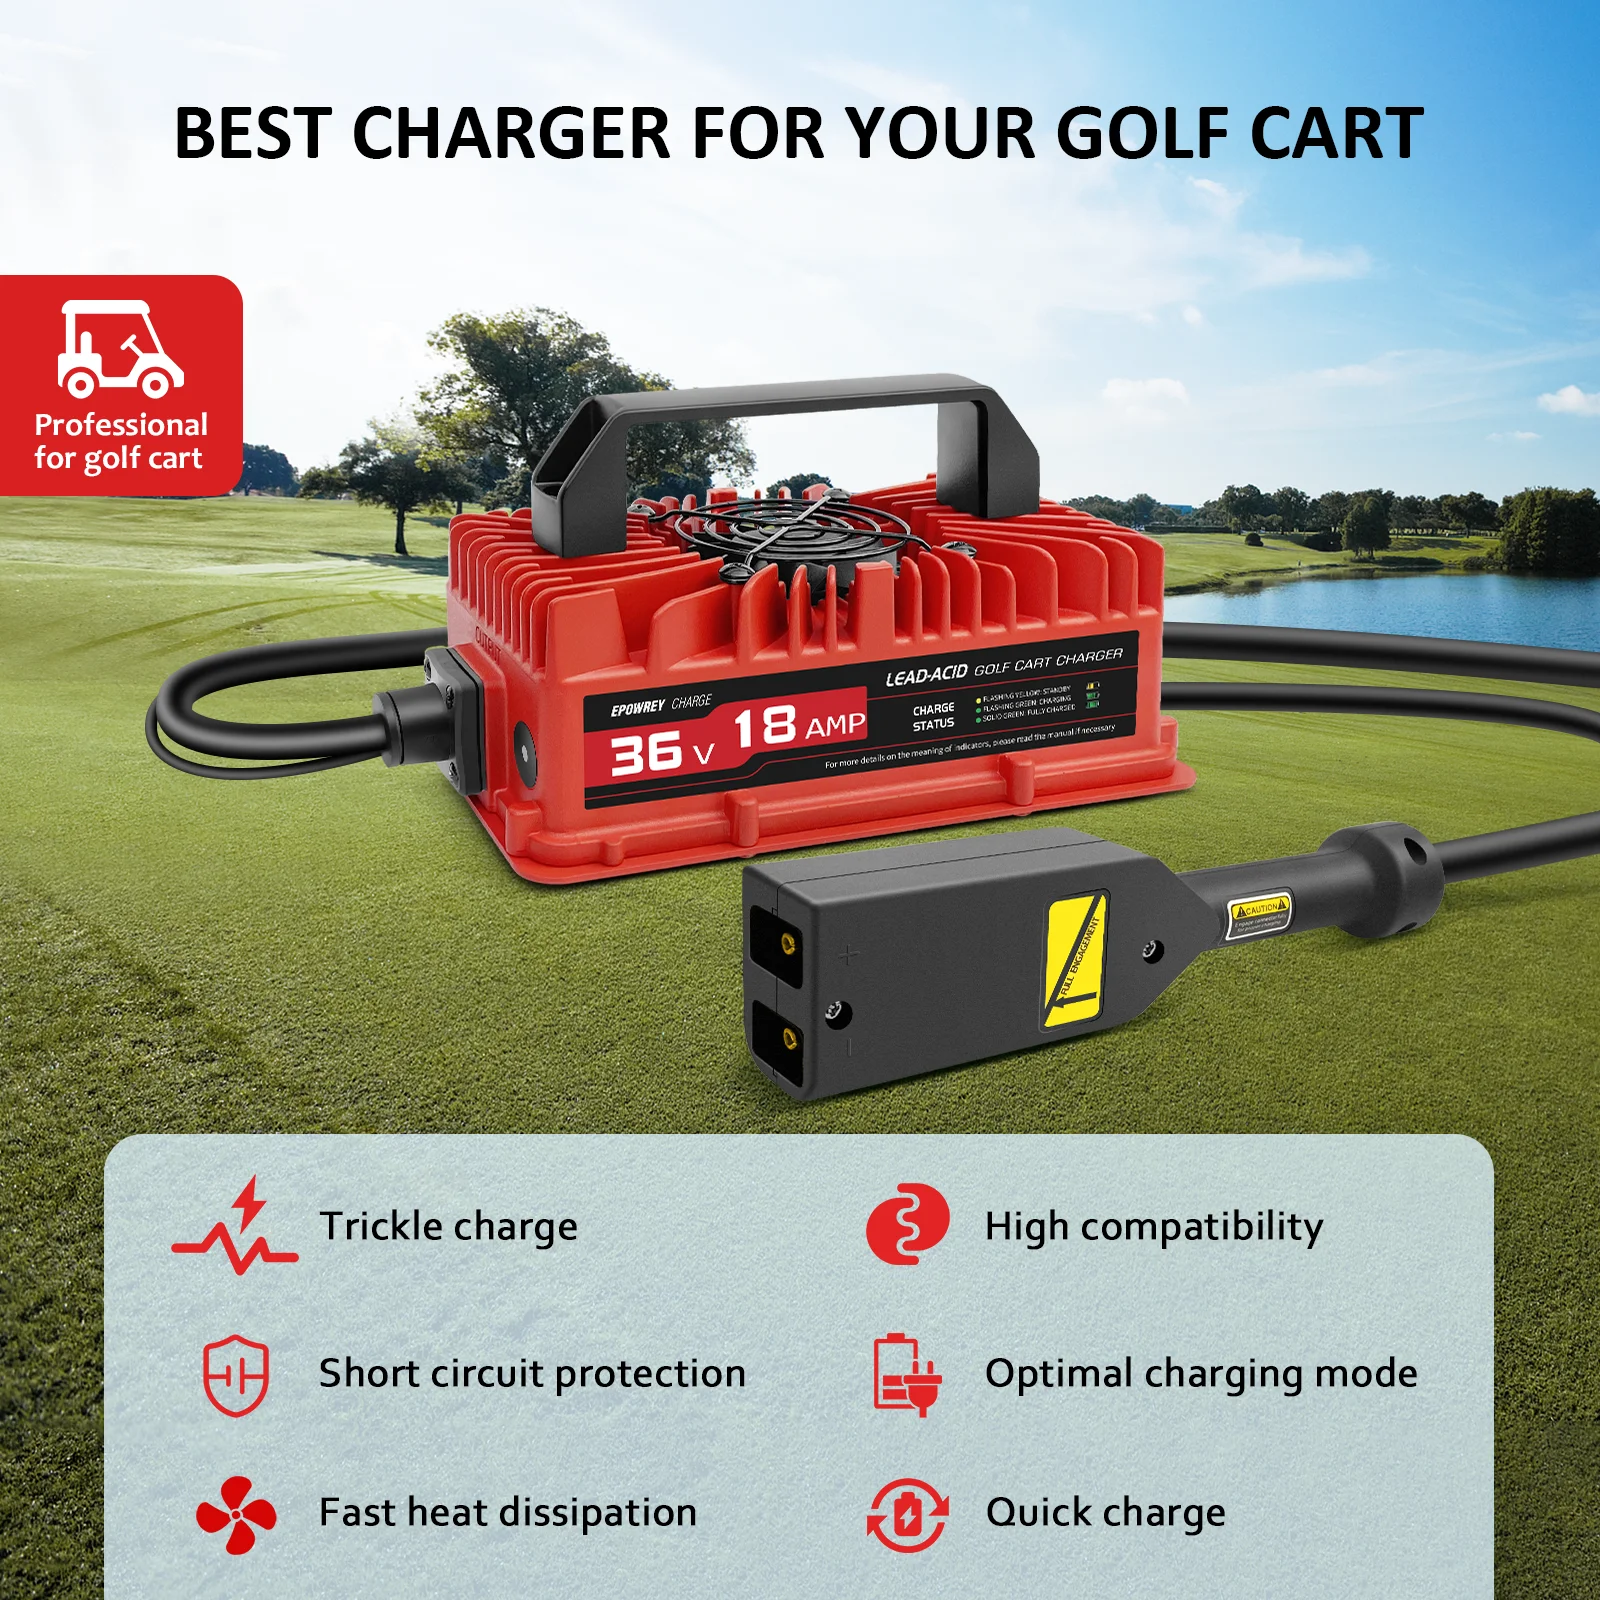 EPOWREY 36V Golf Cart Battery Charger 18 AMP 800W Waterproof Portable Car Lead-acid Battery Charger 50 / 60 Hz For EZGO TXT